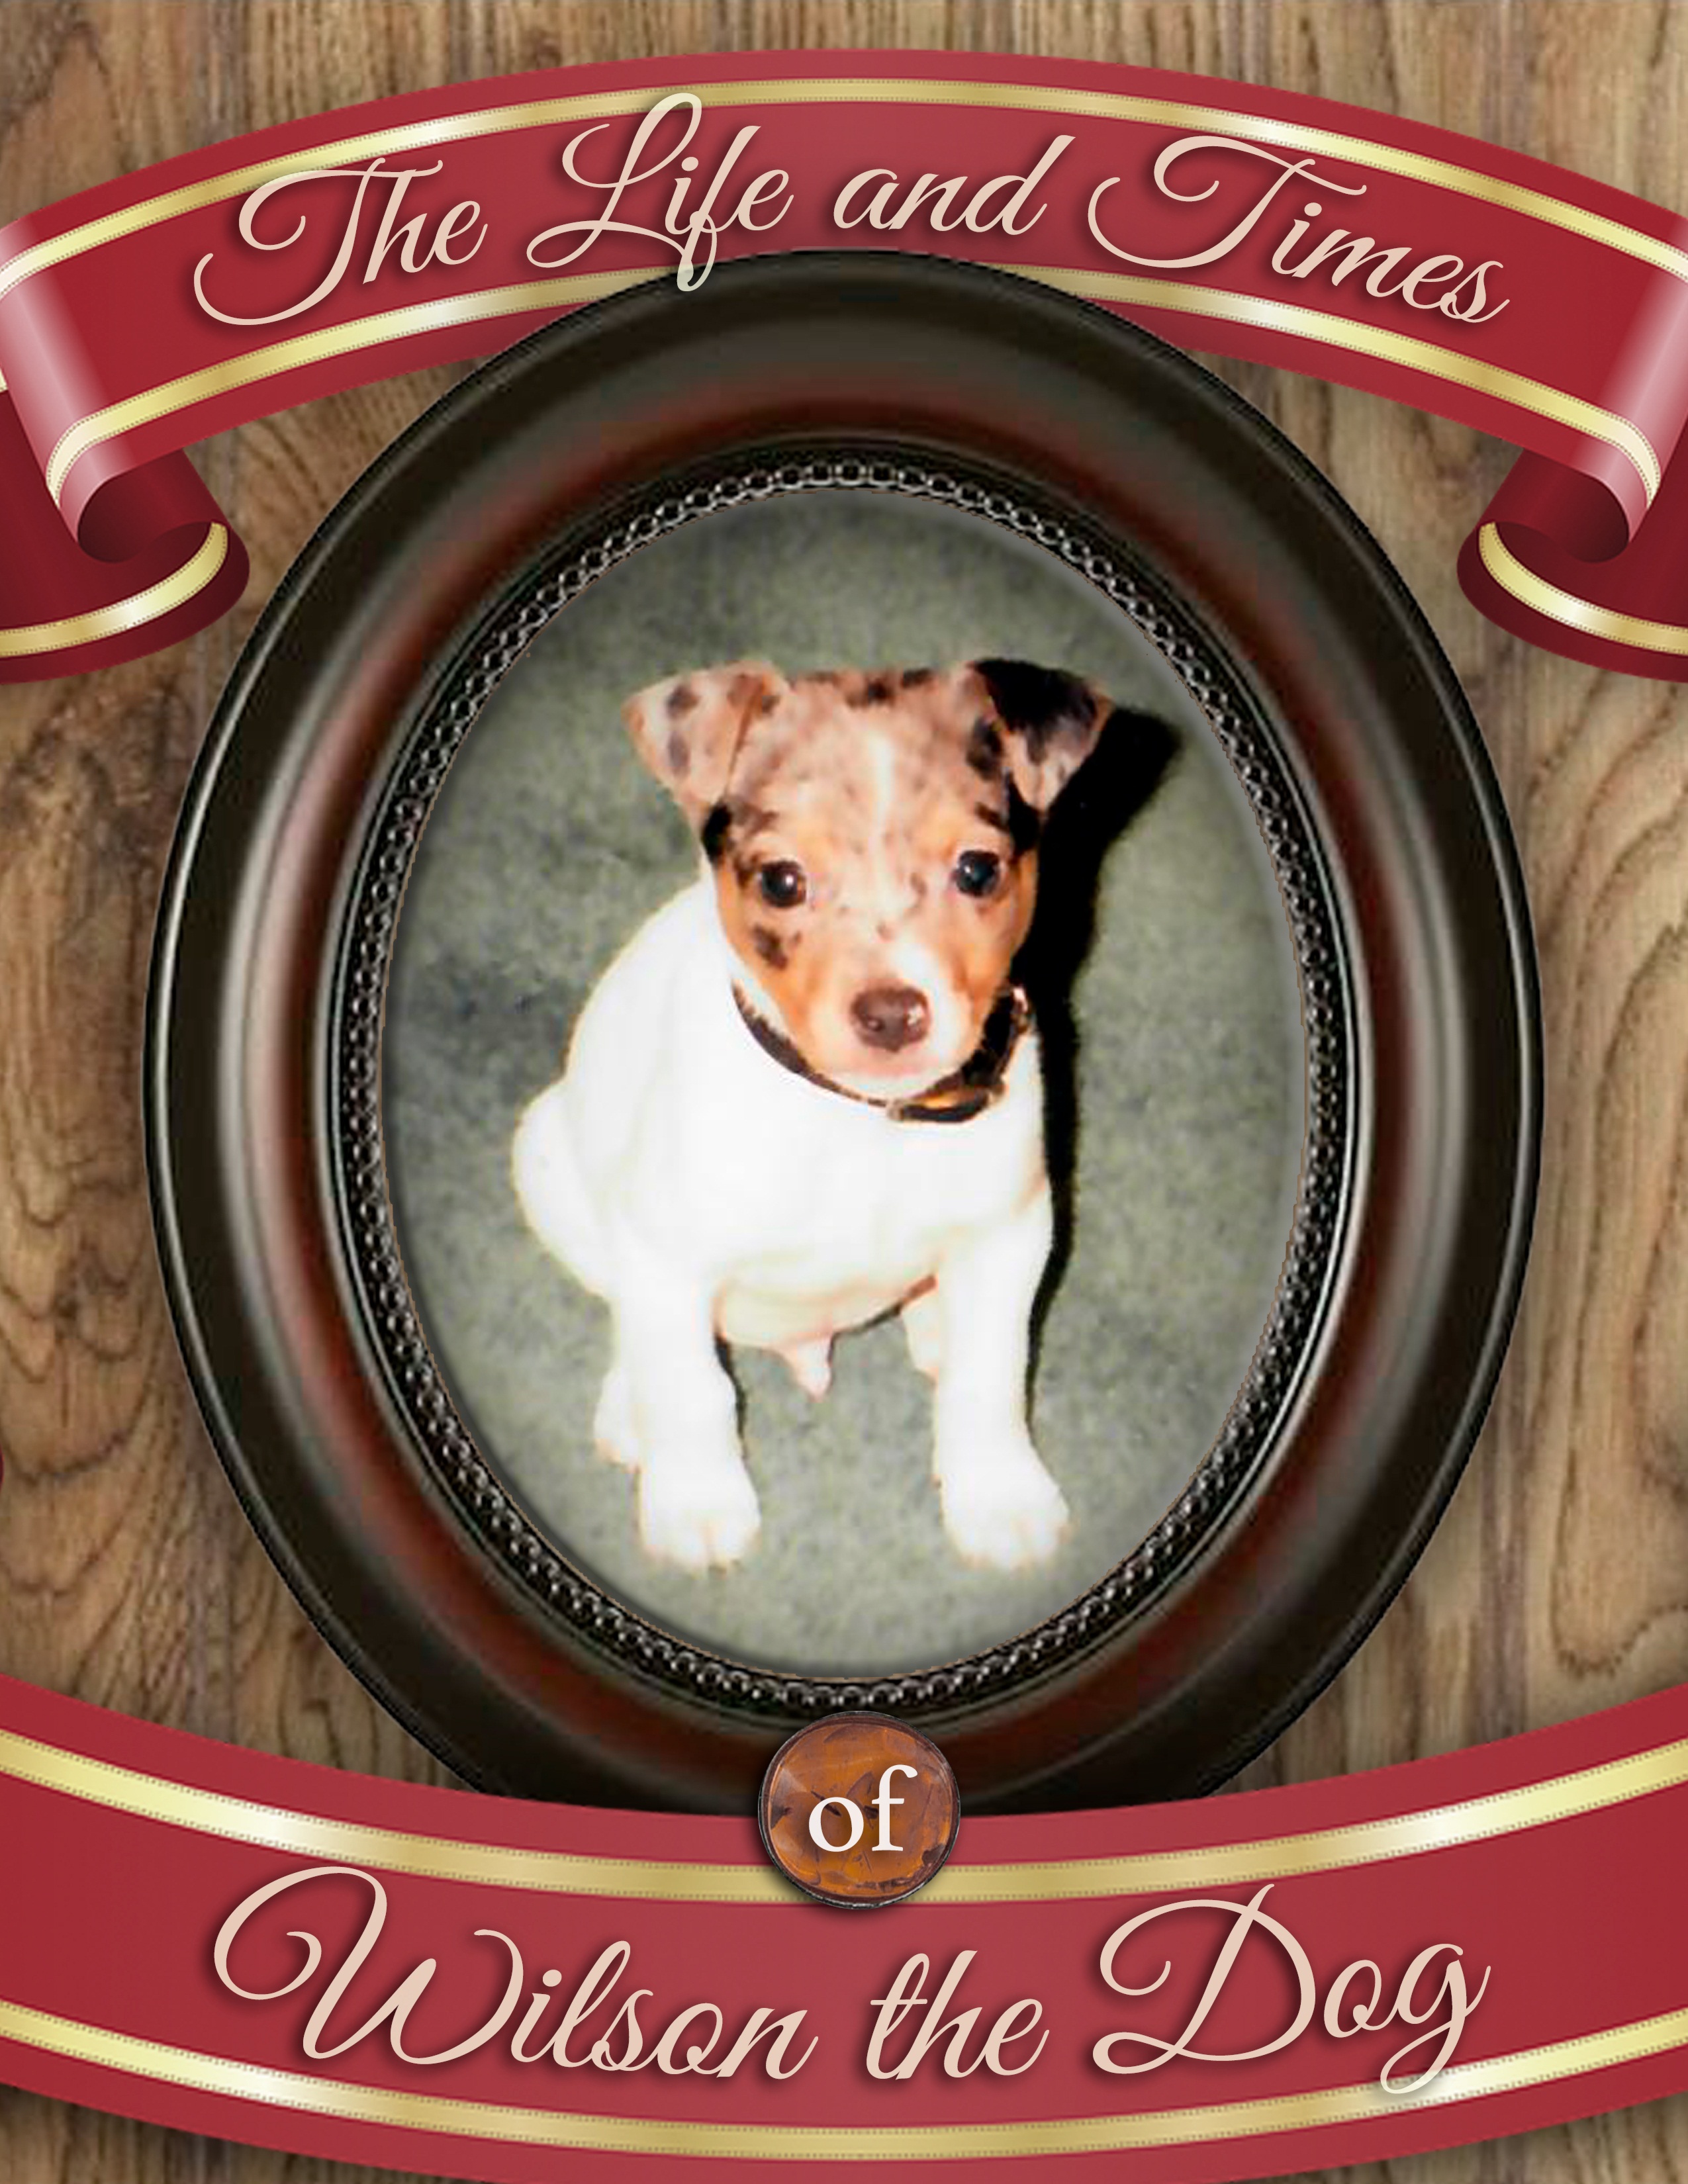 The Days and Life of Wilson the Dog by Joel Snell